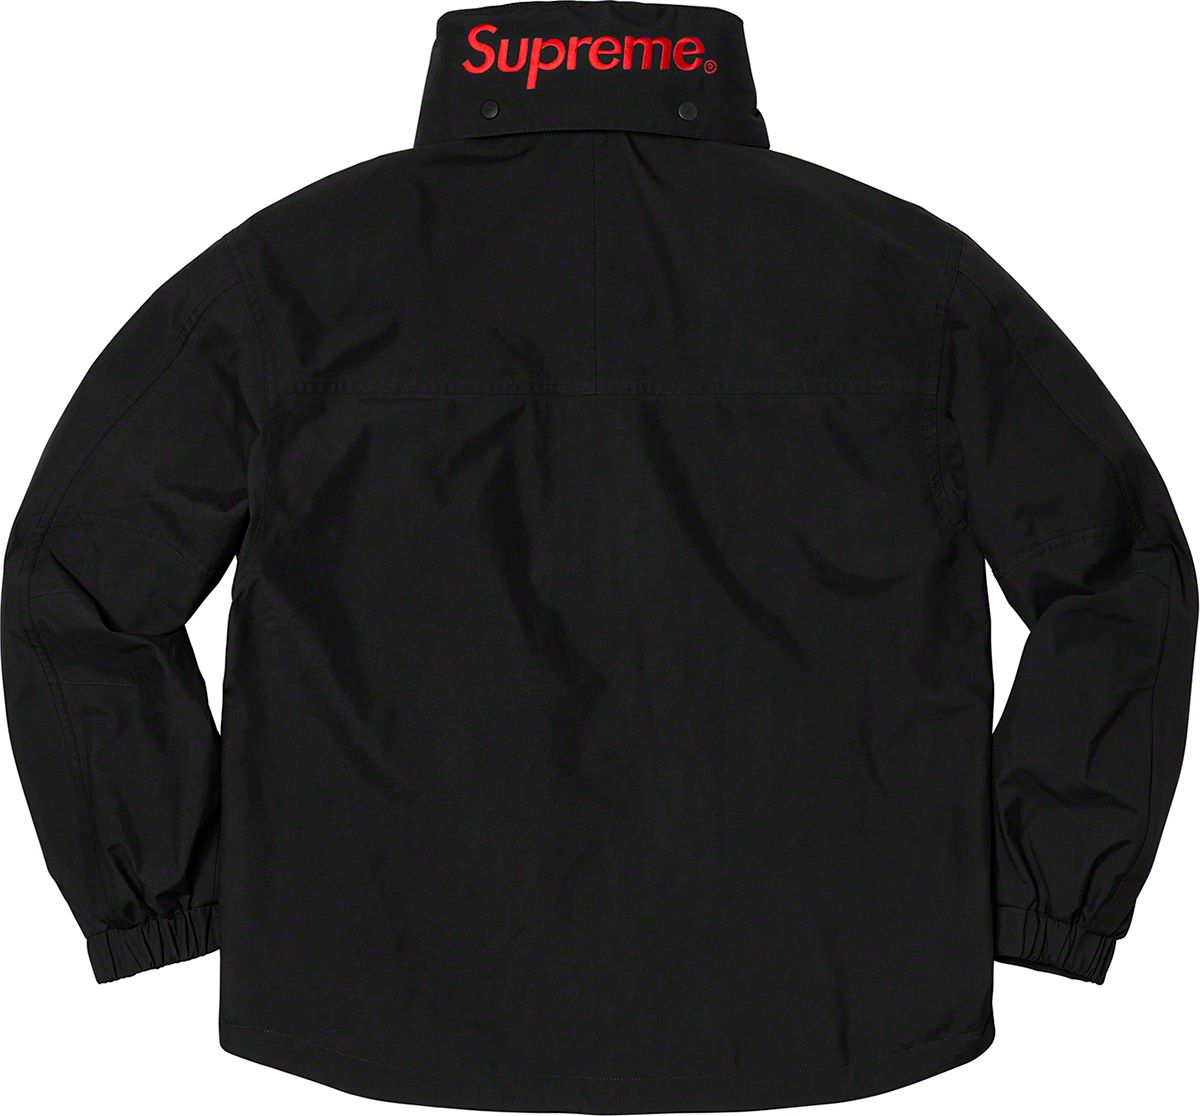 GORE-TEX Anorak - Spring/Summer 2020 Preview – Supreme